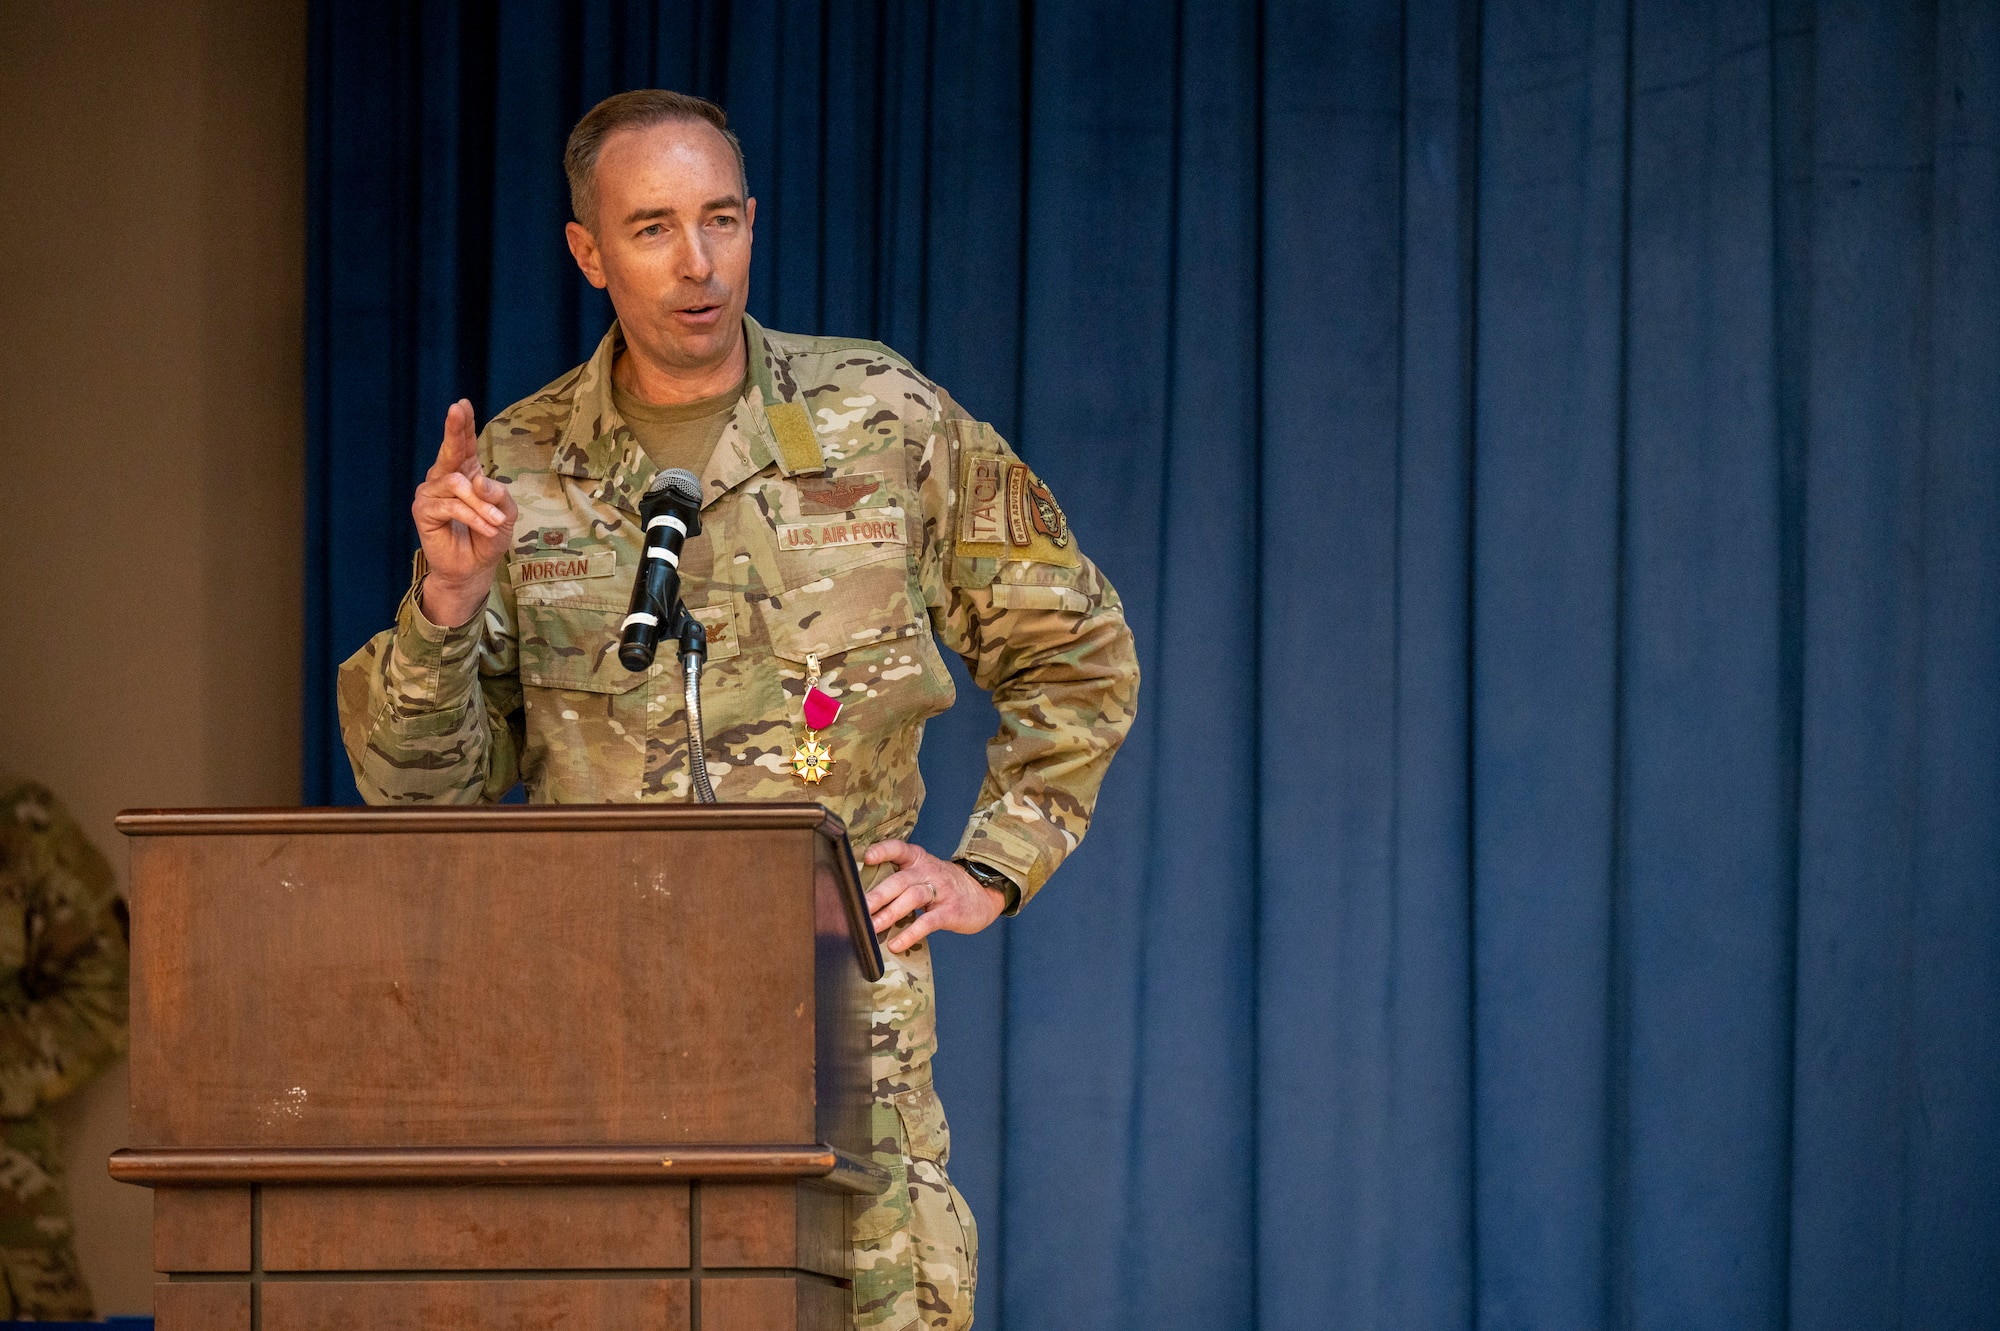 U.S. Air Force Col. Scott Morgan, left, 607th Air Support Operations Group (ASOG) outgoing commander, provides a speech during a change of command at Osan Air Base, Republic of Korea, June 26, 2023. During the ceremony, Col. Patrick Lowe took command of the 607th ASOG. (U.S. Air Force photo by Senior Airman Aaron Edwards)